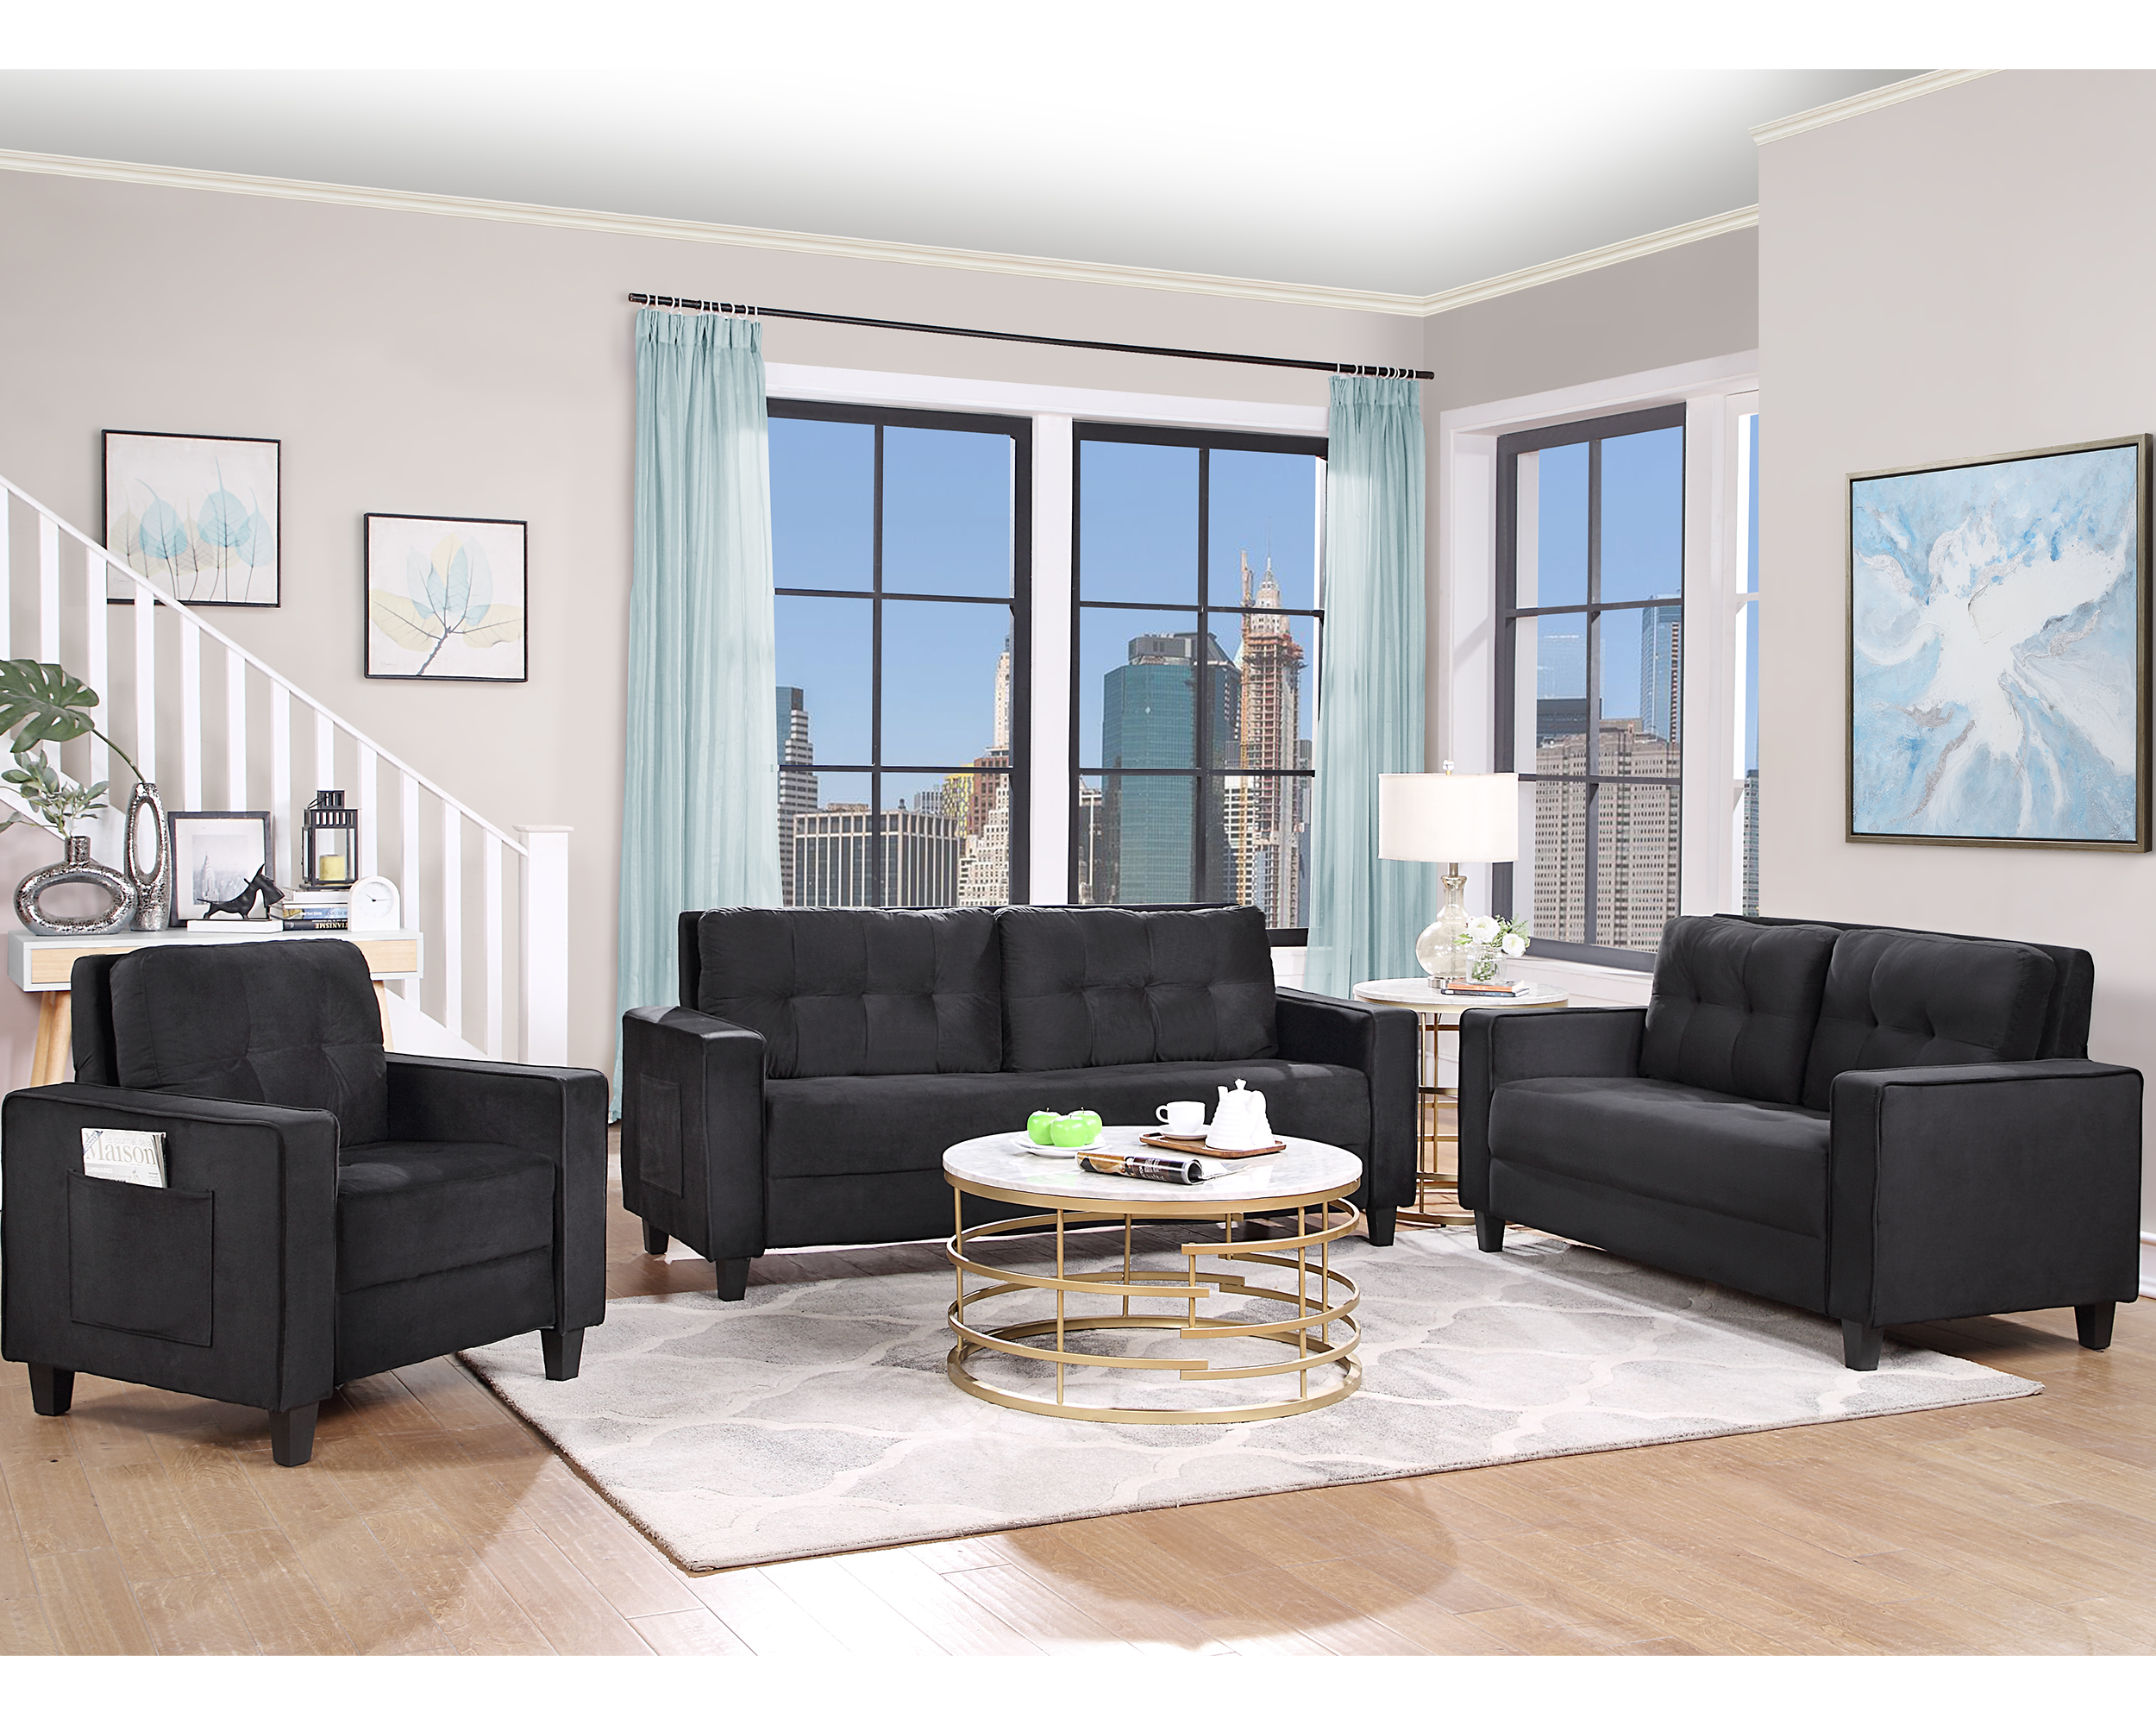 Morden Style Sectional Sofa Set - 1+2+3-Seat - SG000403AAA